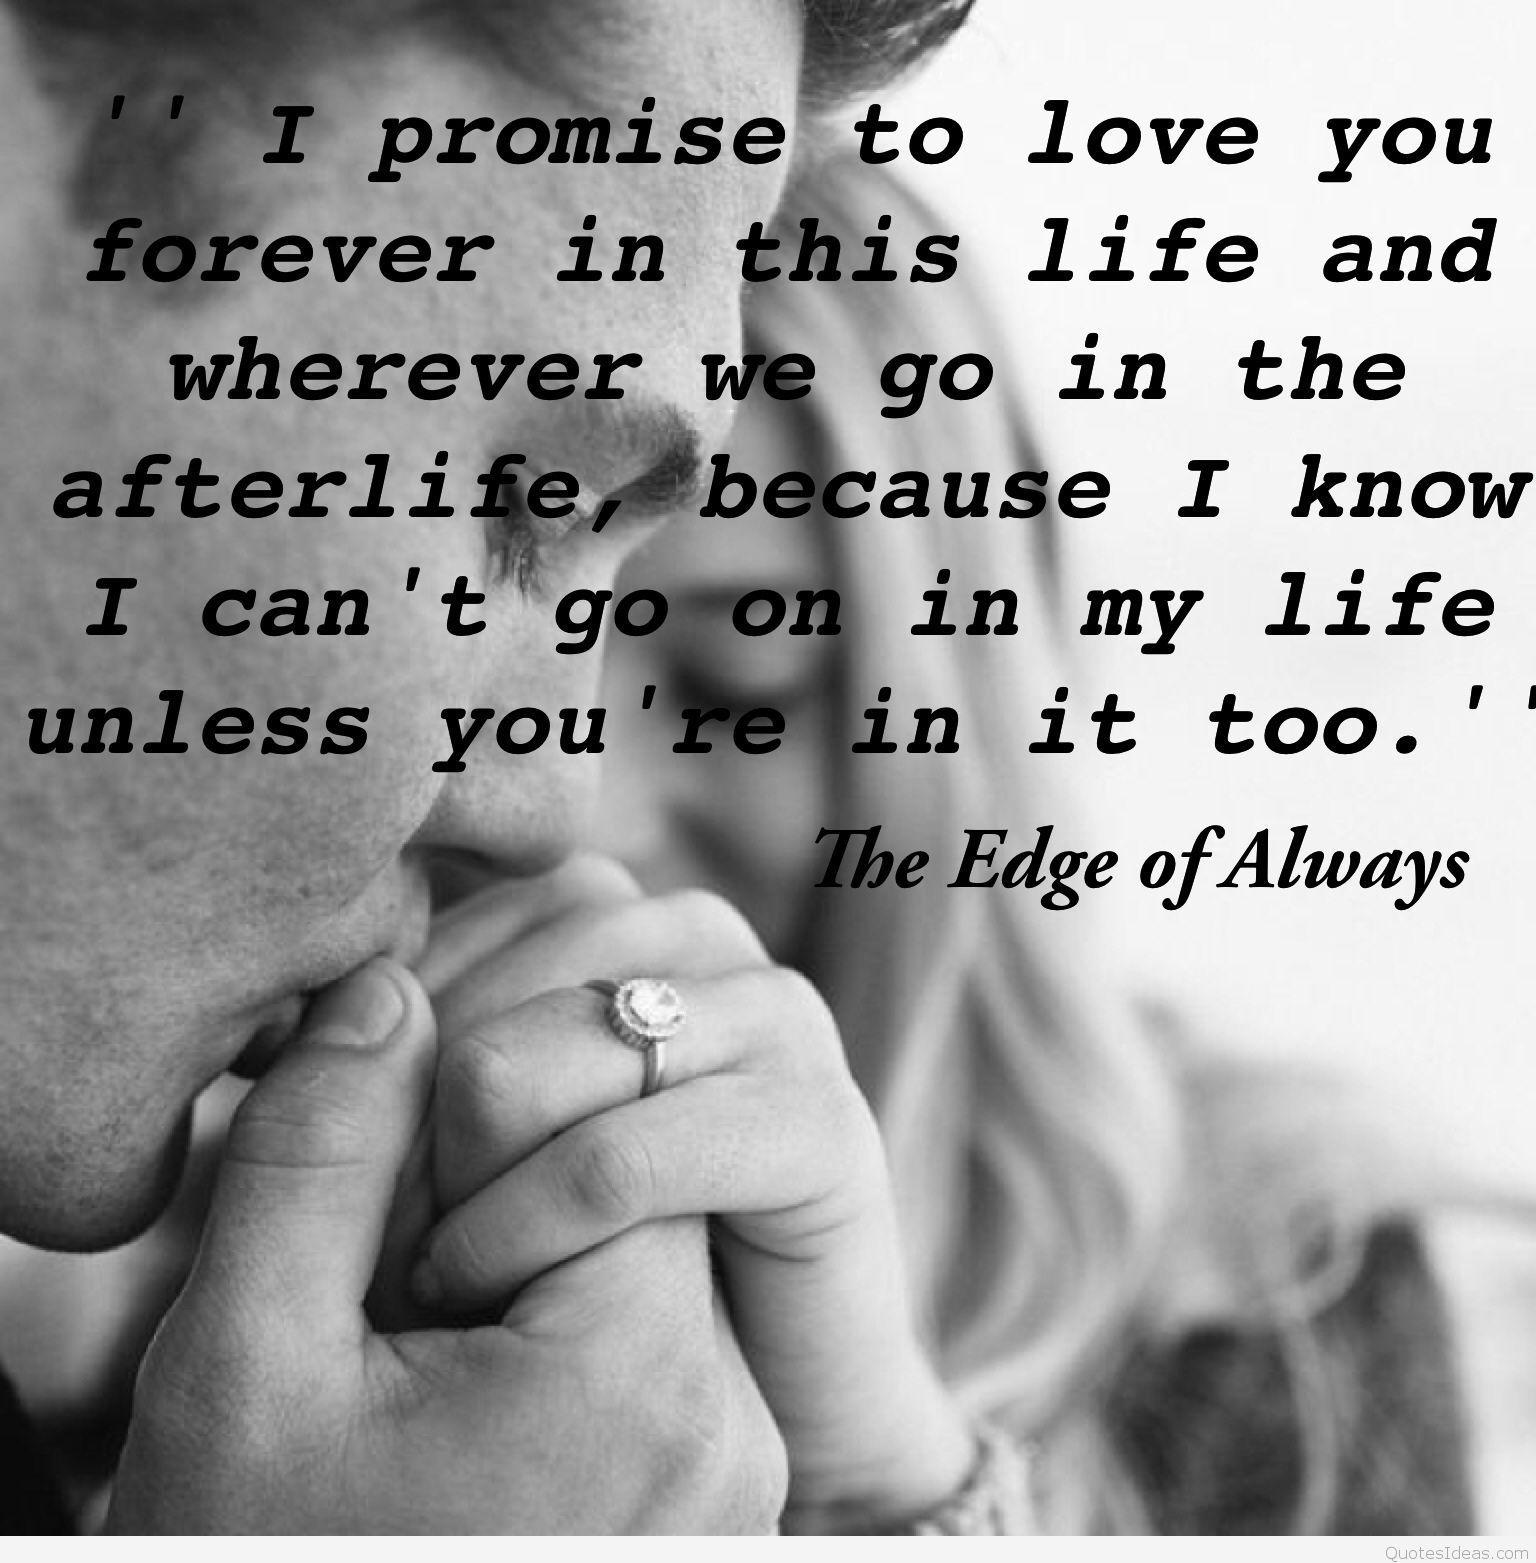 image Of Love Quotes For Boyfriend Love U Messages